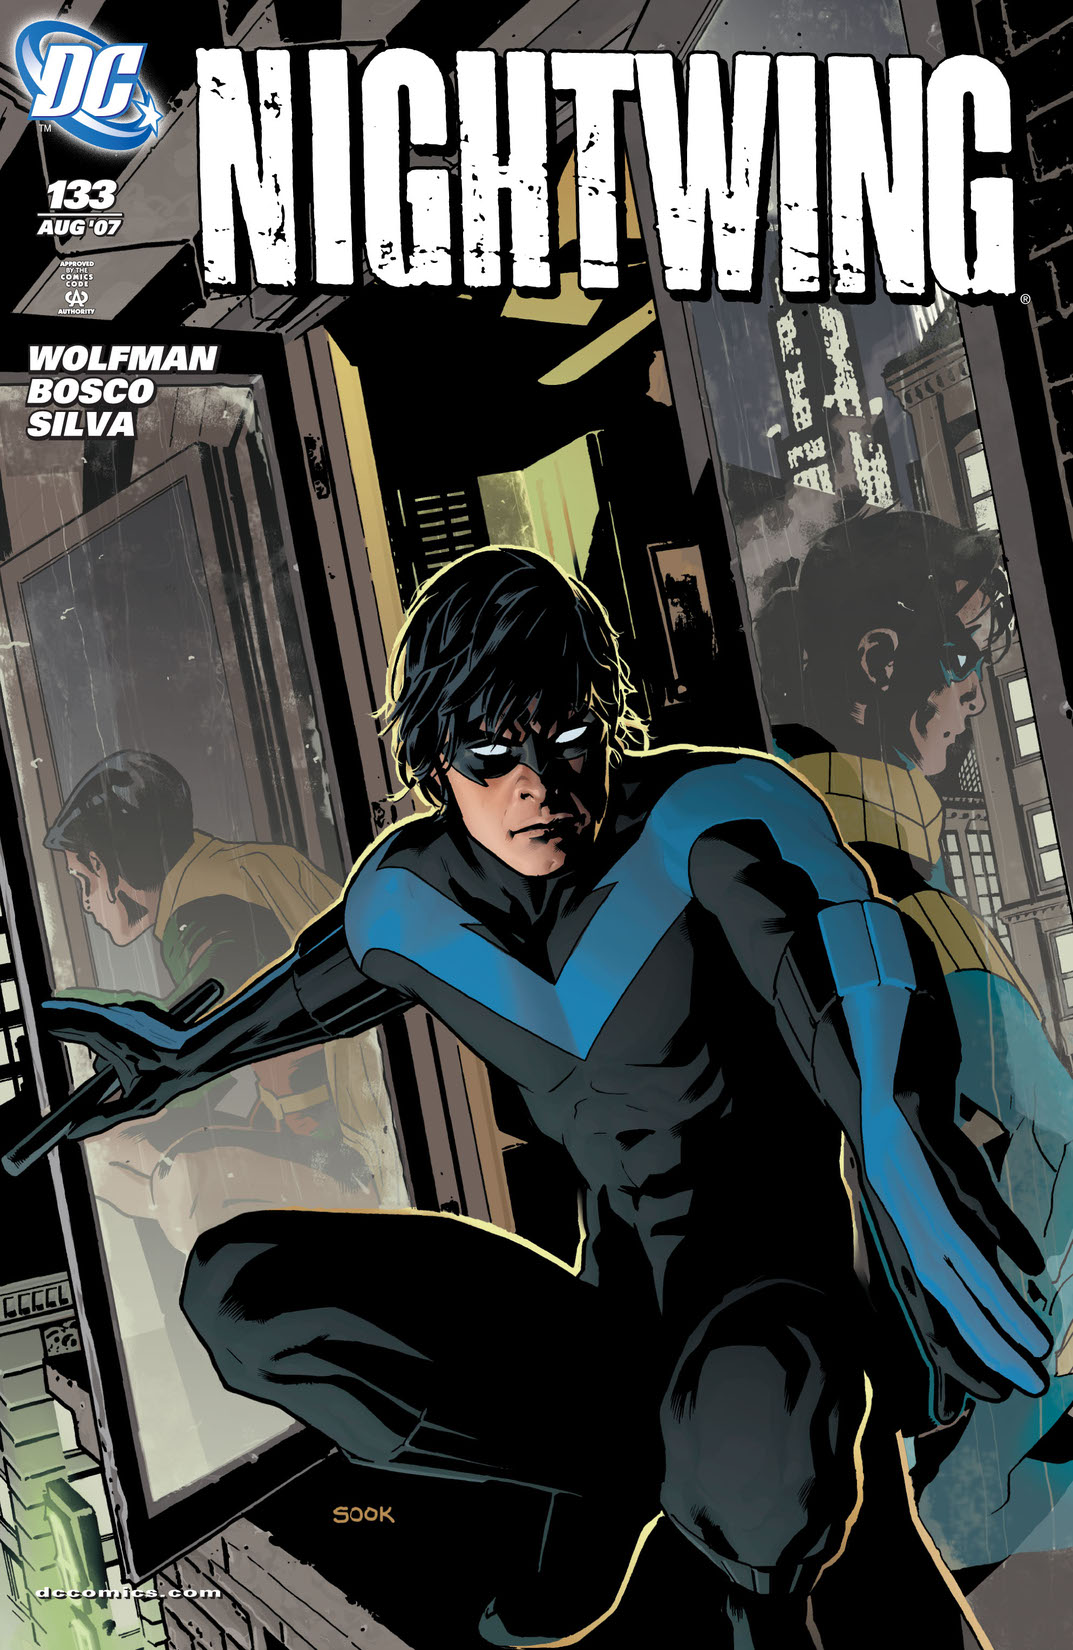 Nightwing (1996-) #133 preview images